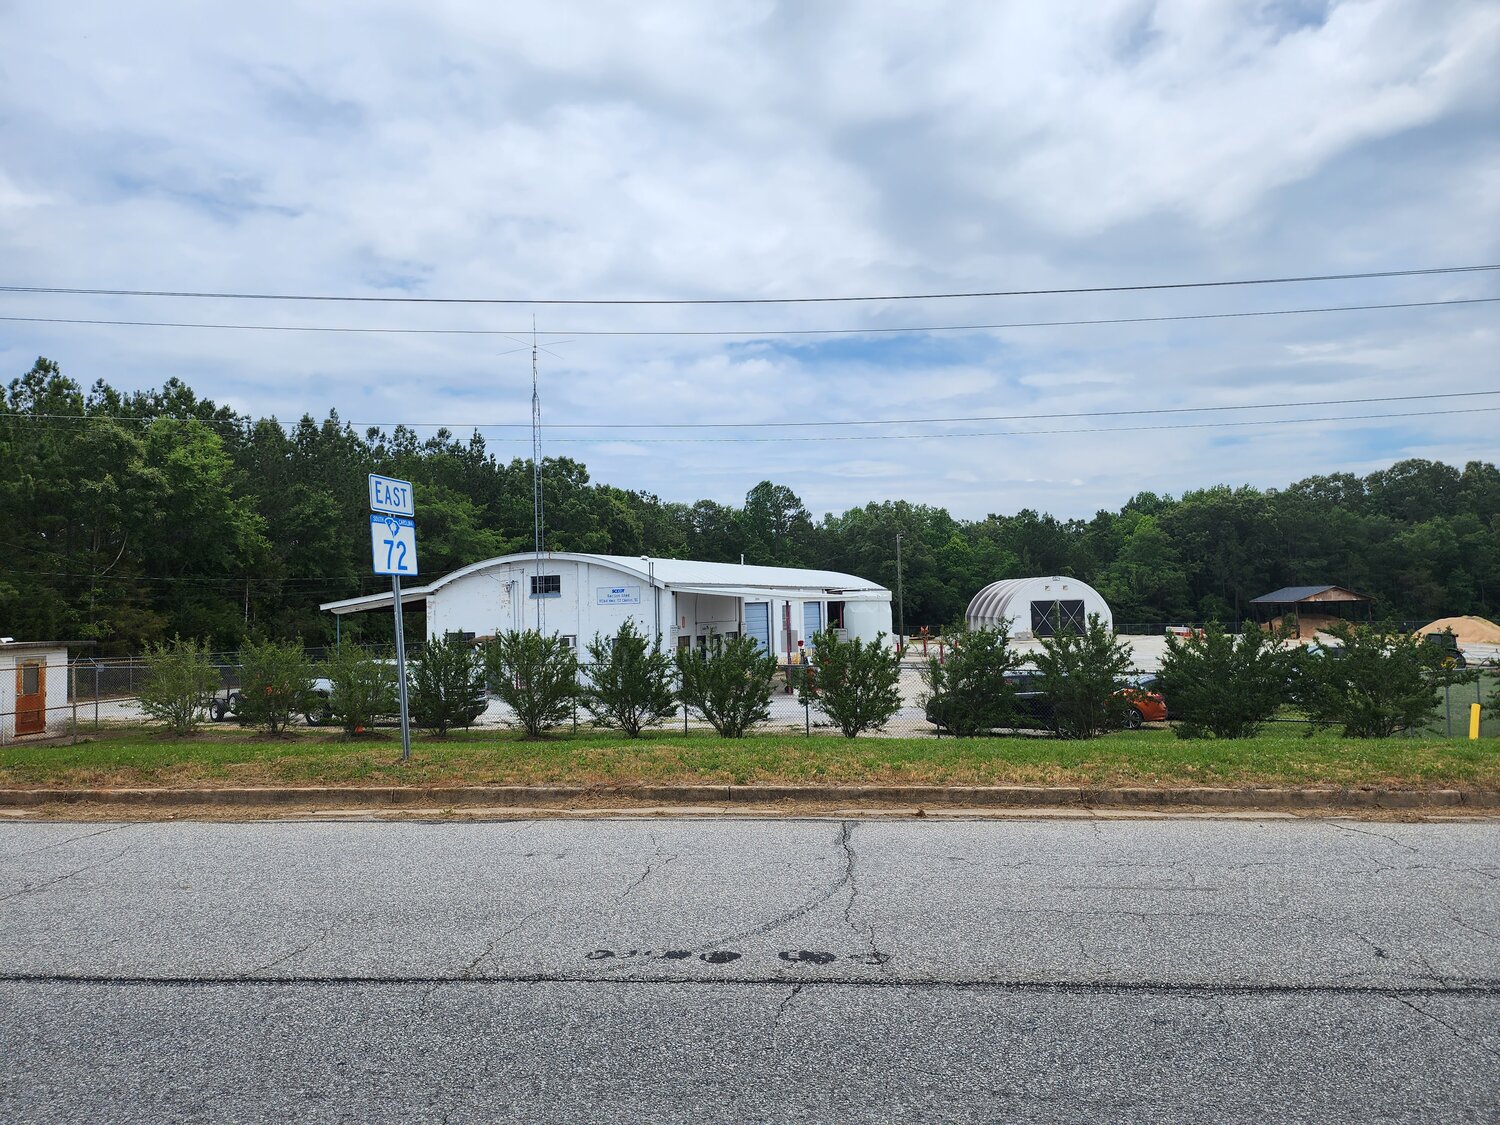 BEHIND the SC DOT maintenance shed at I-26 and Hwy 72 is the City of Clinton's next industrial park, former property of Whitten Center. The City is planning to cut a side entrance into this property.